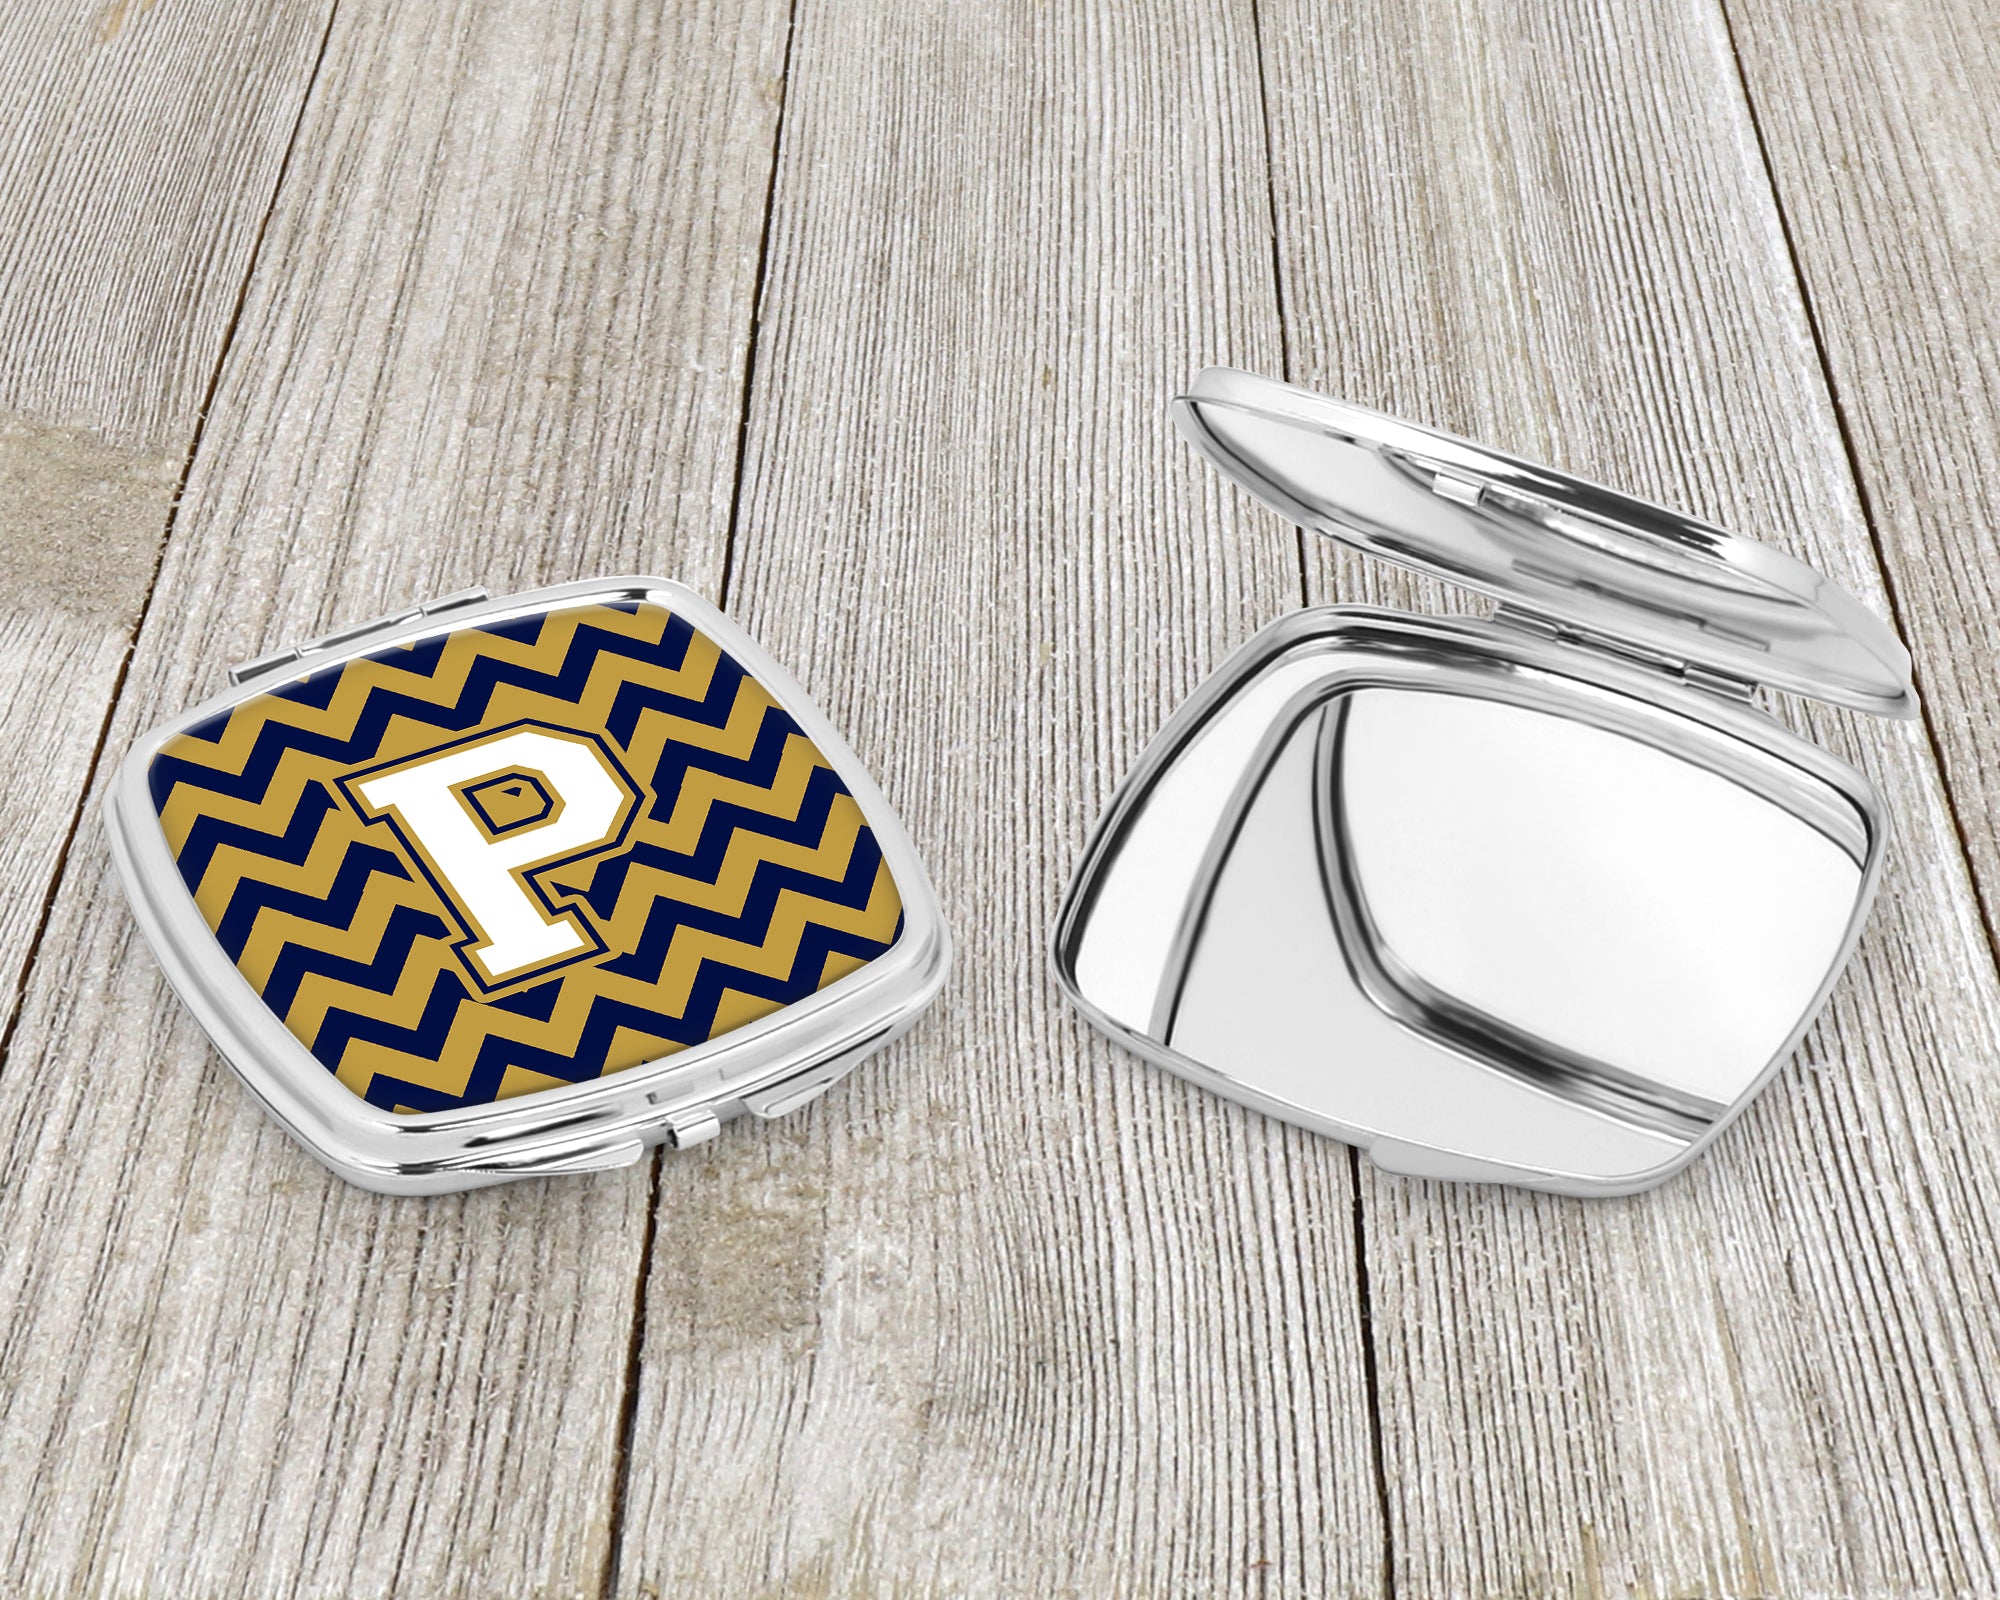 Letter P Chevron Navy Blue and Gold Compact Mirror CJ1057-PSCM